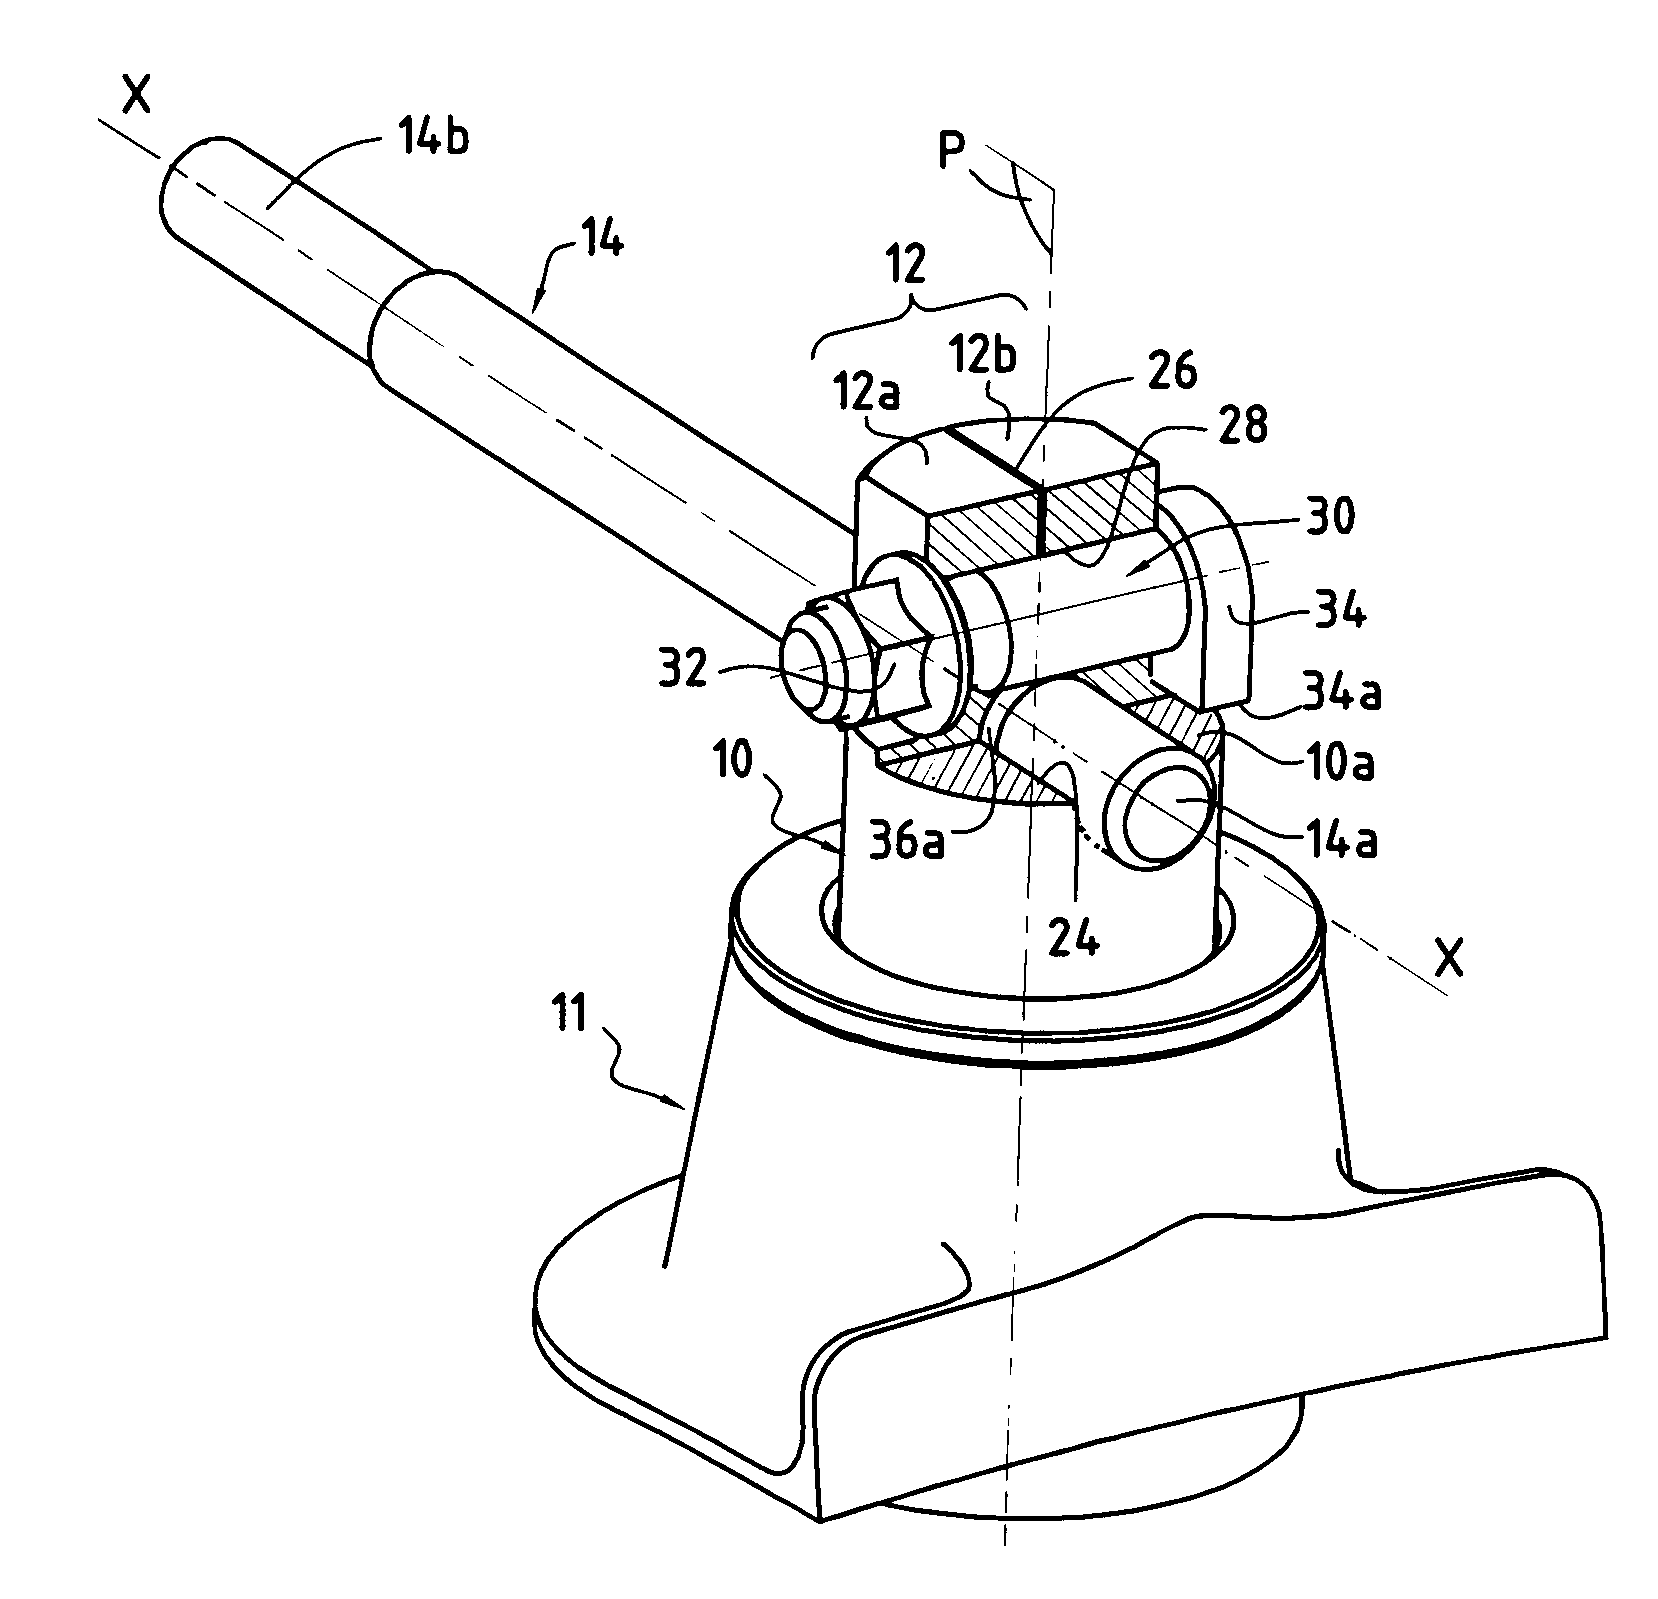 Cylindrical-rod device for controlling a variable-pitch vane of a turbomachine